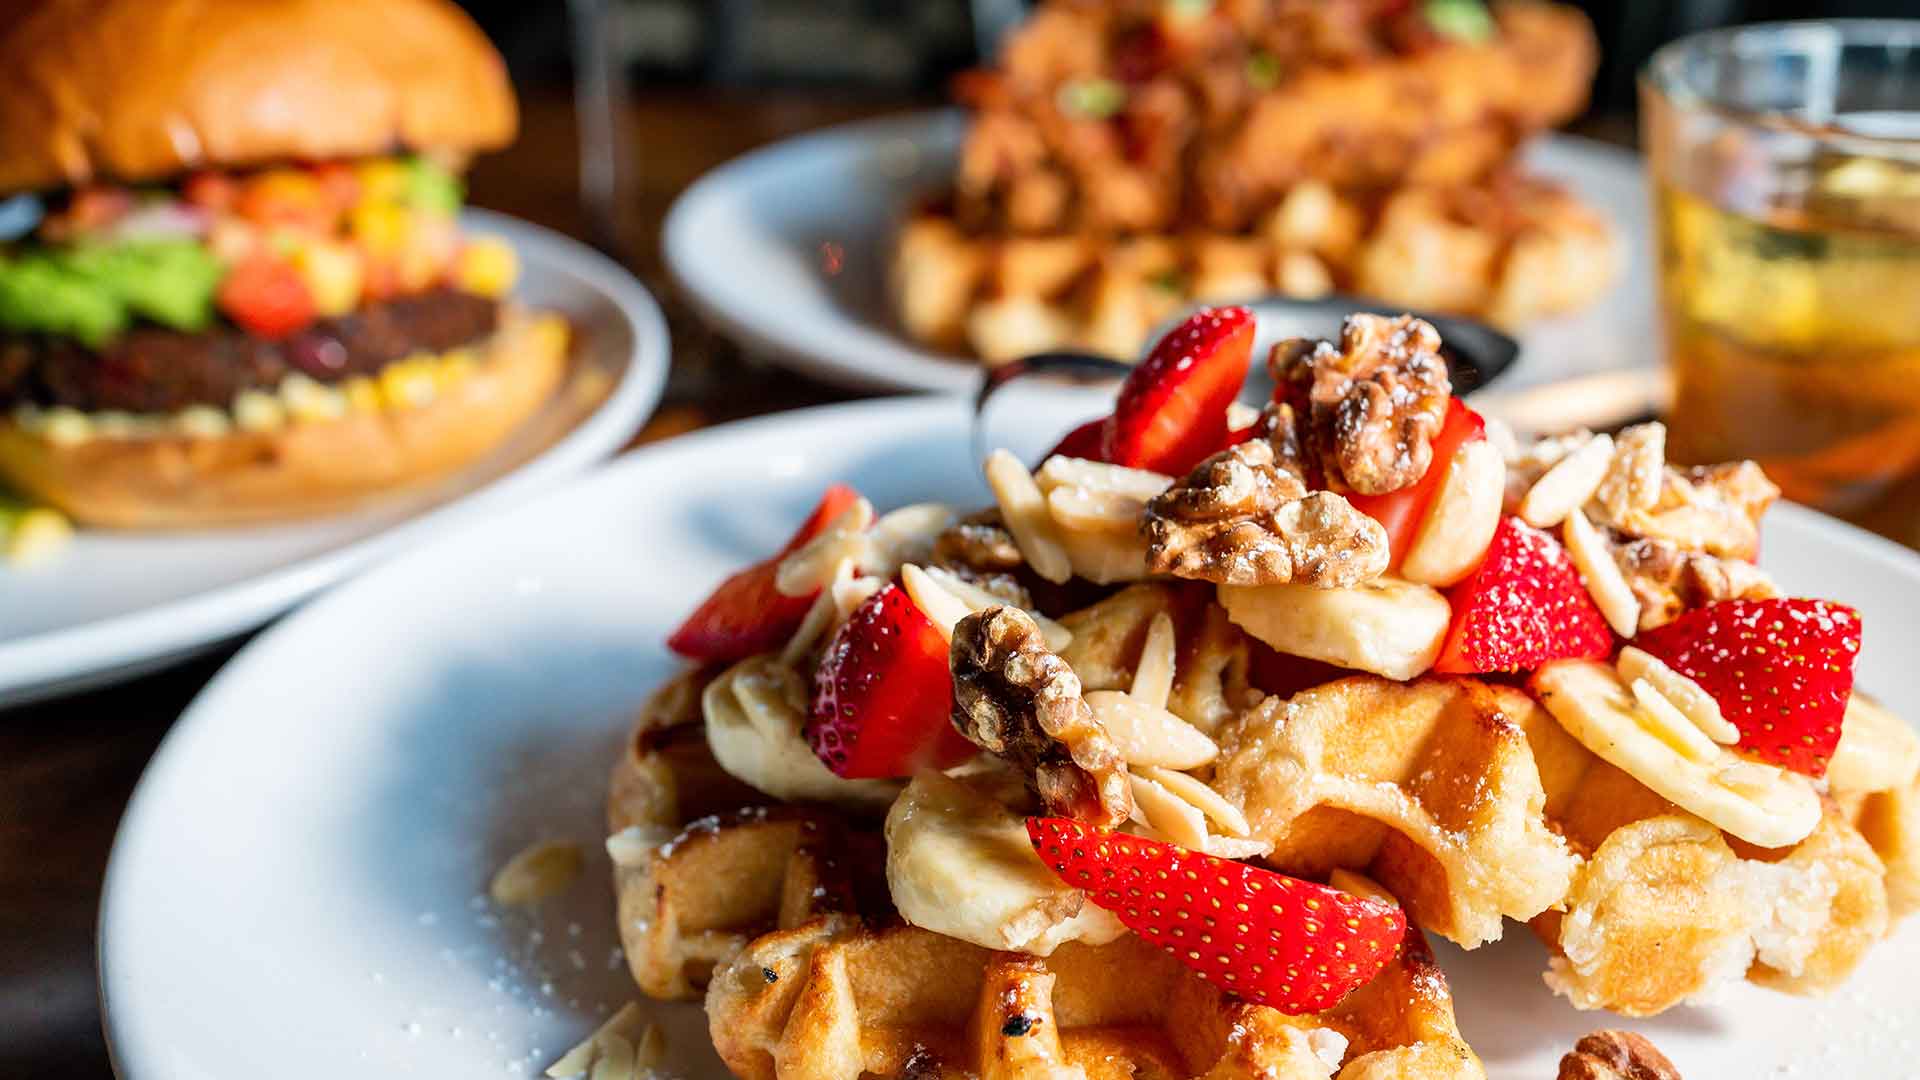 Delicious Fruit and Nut Waffles with Pearl Sugar, Strawberries, Bananas, Almonds, Walnuts, Powdered Sugar, Butter, and Maple Syrup - served fresh at Artisan's Table during brunch.